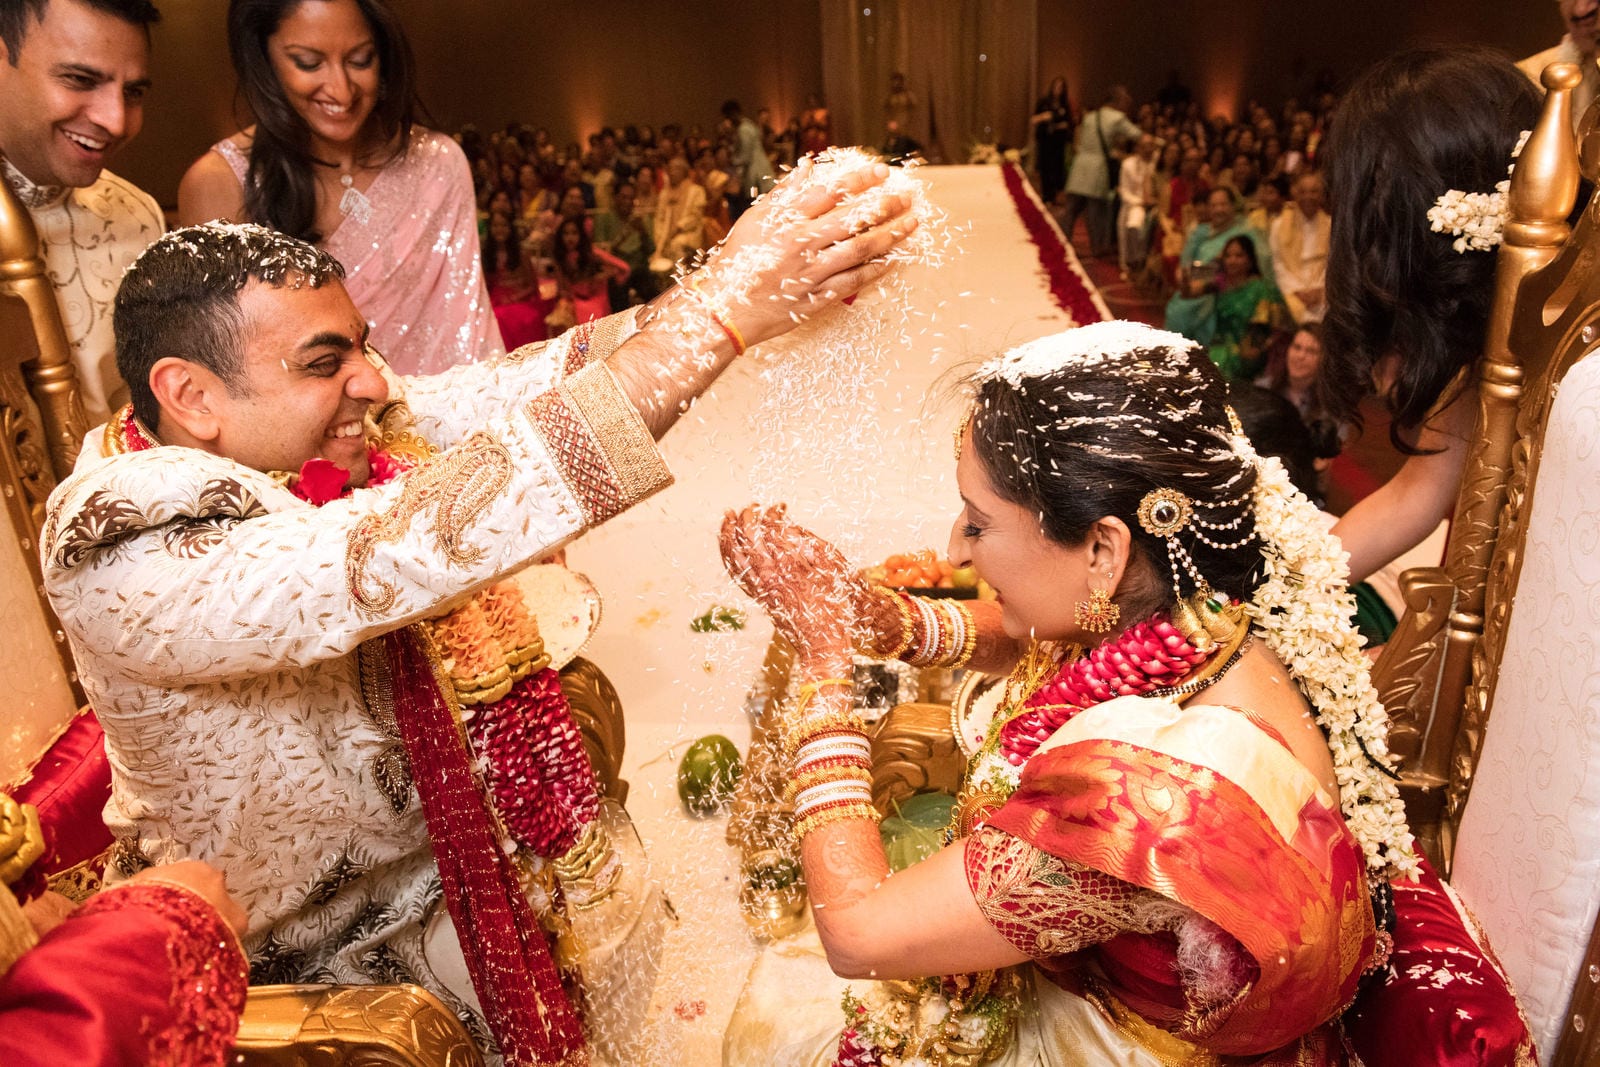 A bride and groom in traditional Indian outfits laugh and dump rice on each other during their wedding at the Wyndham Grand hotel in Pittsburgh.